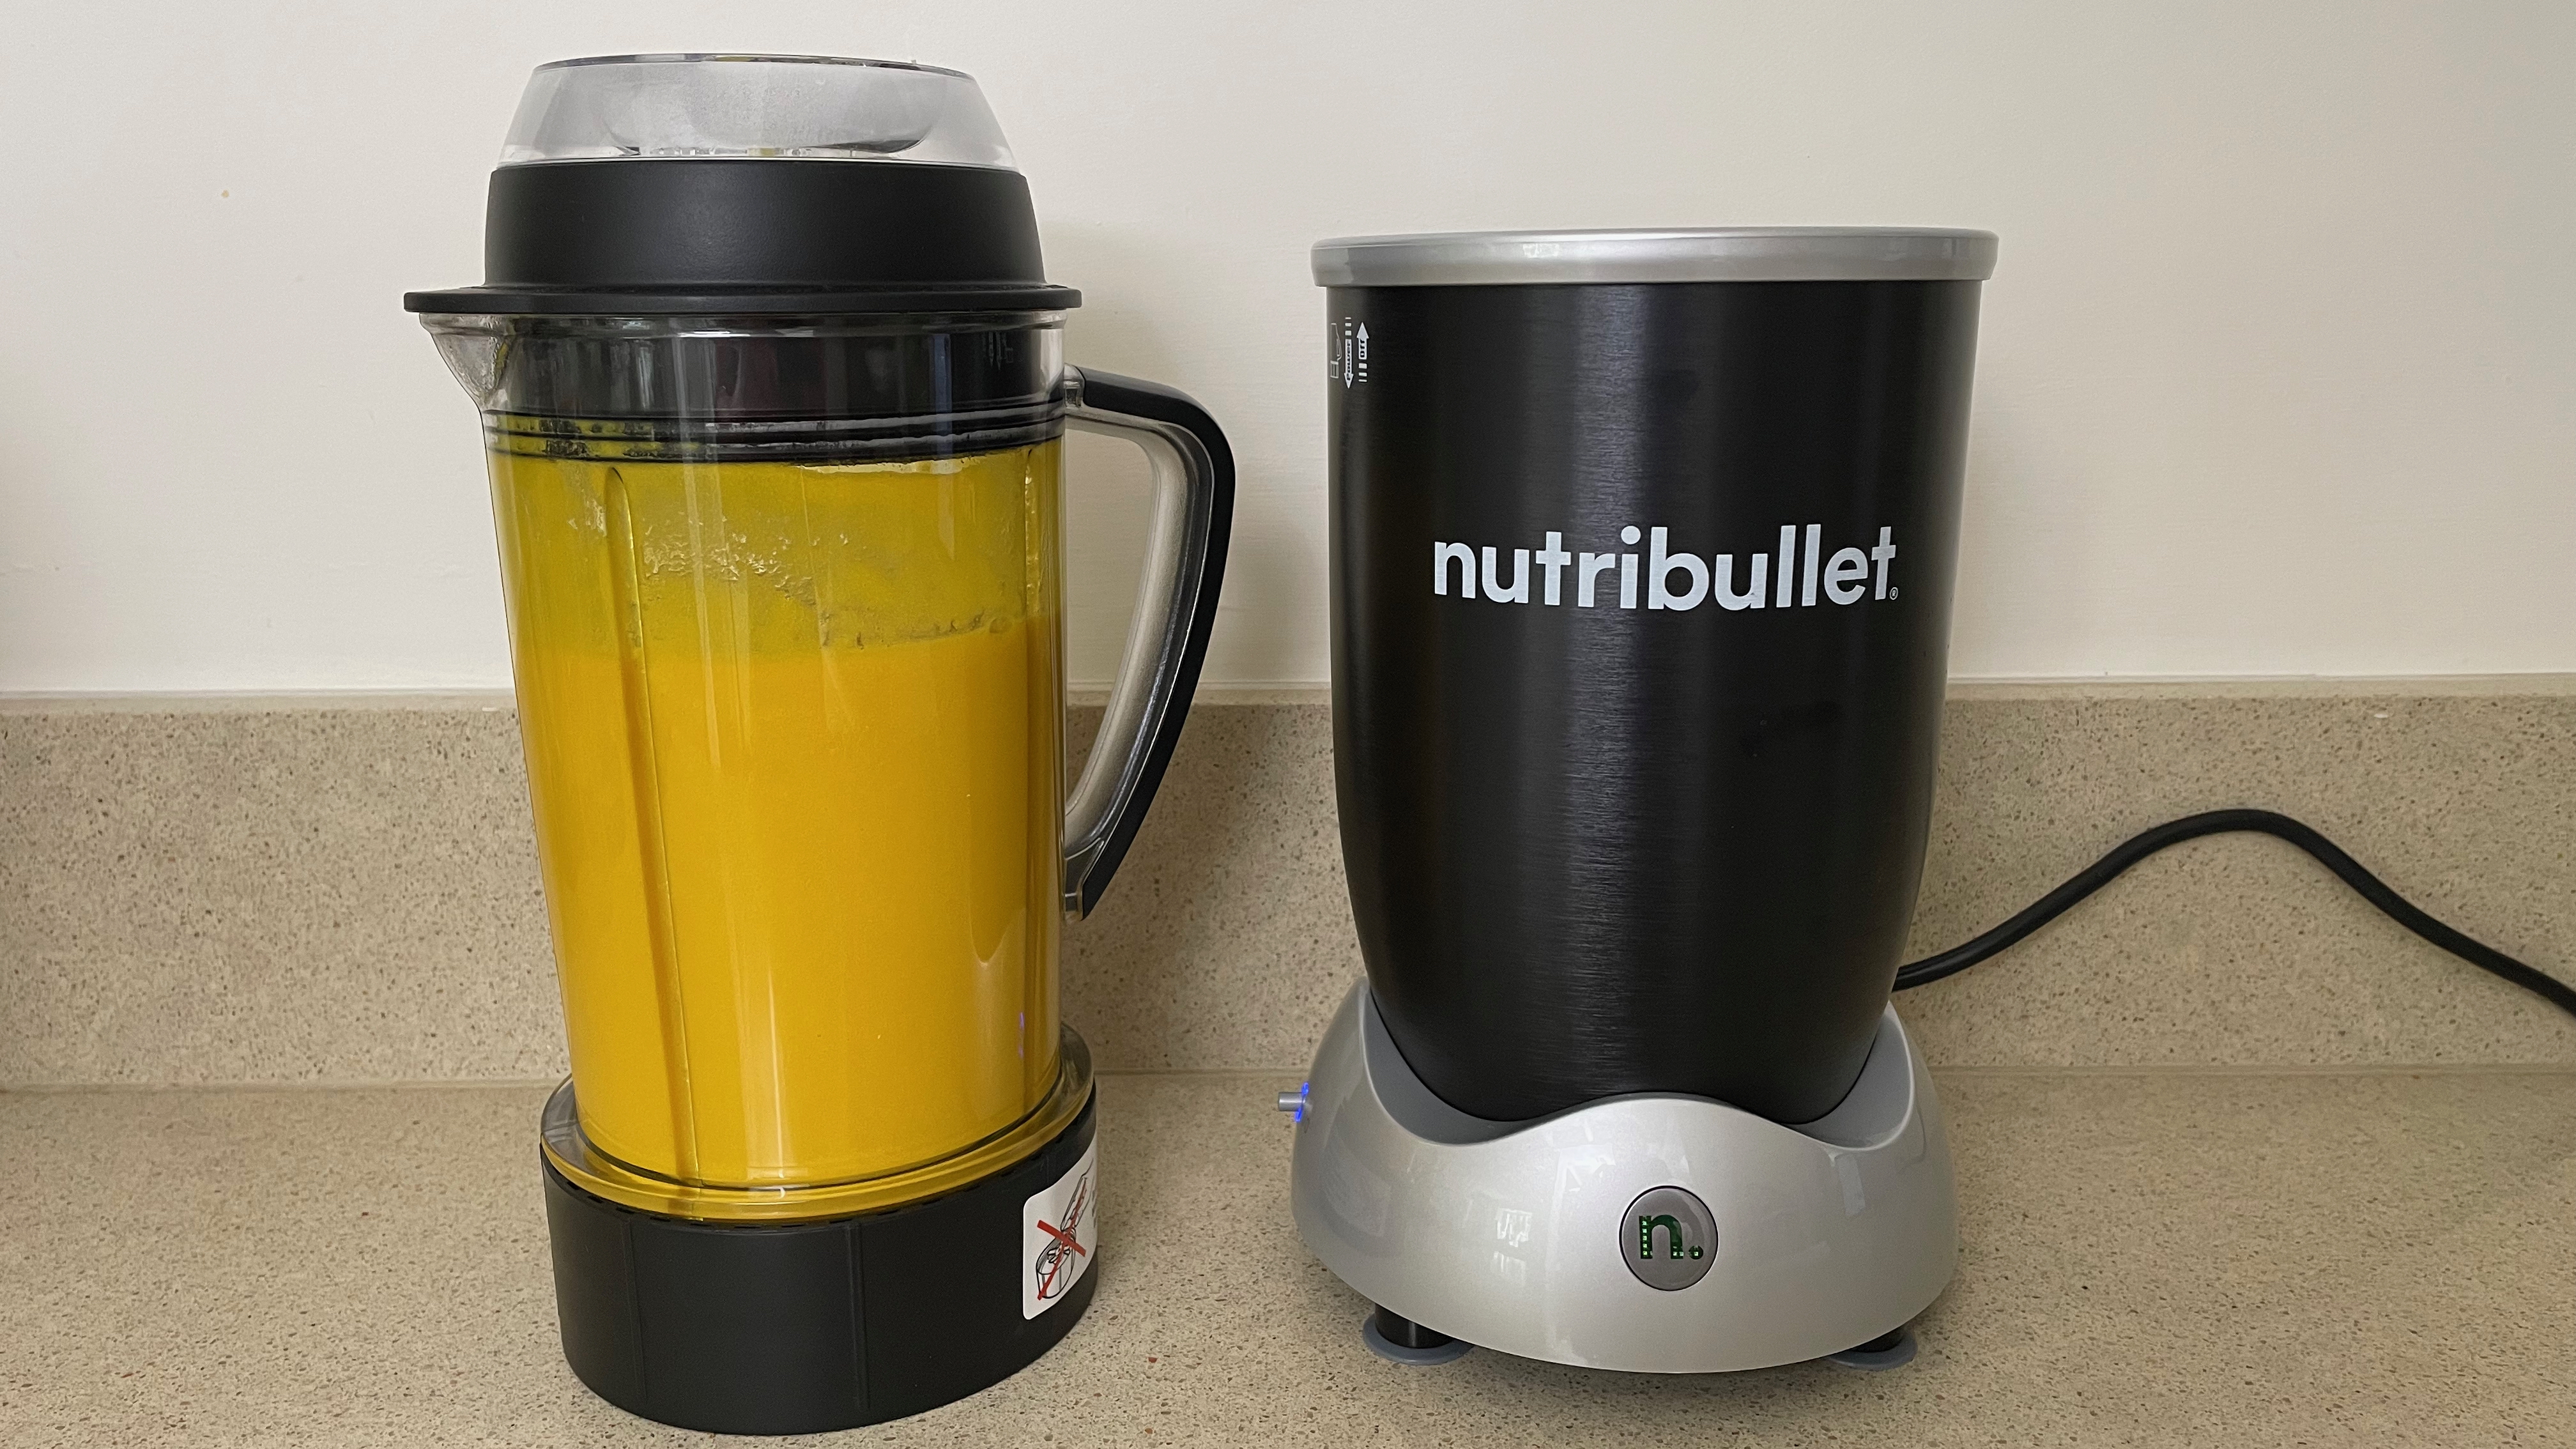 Nutribullet Rx with a blended, heated soup inside